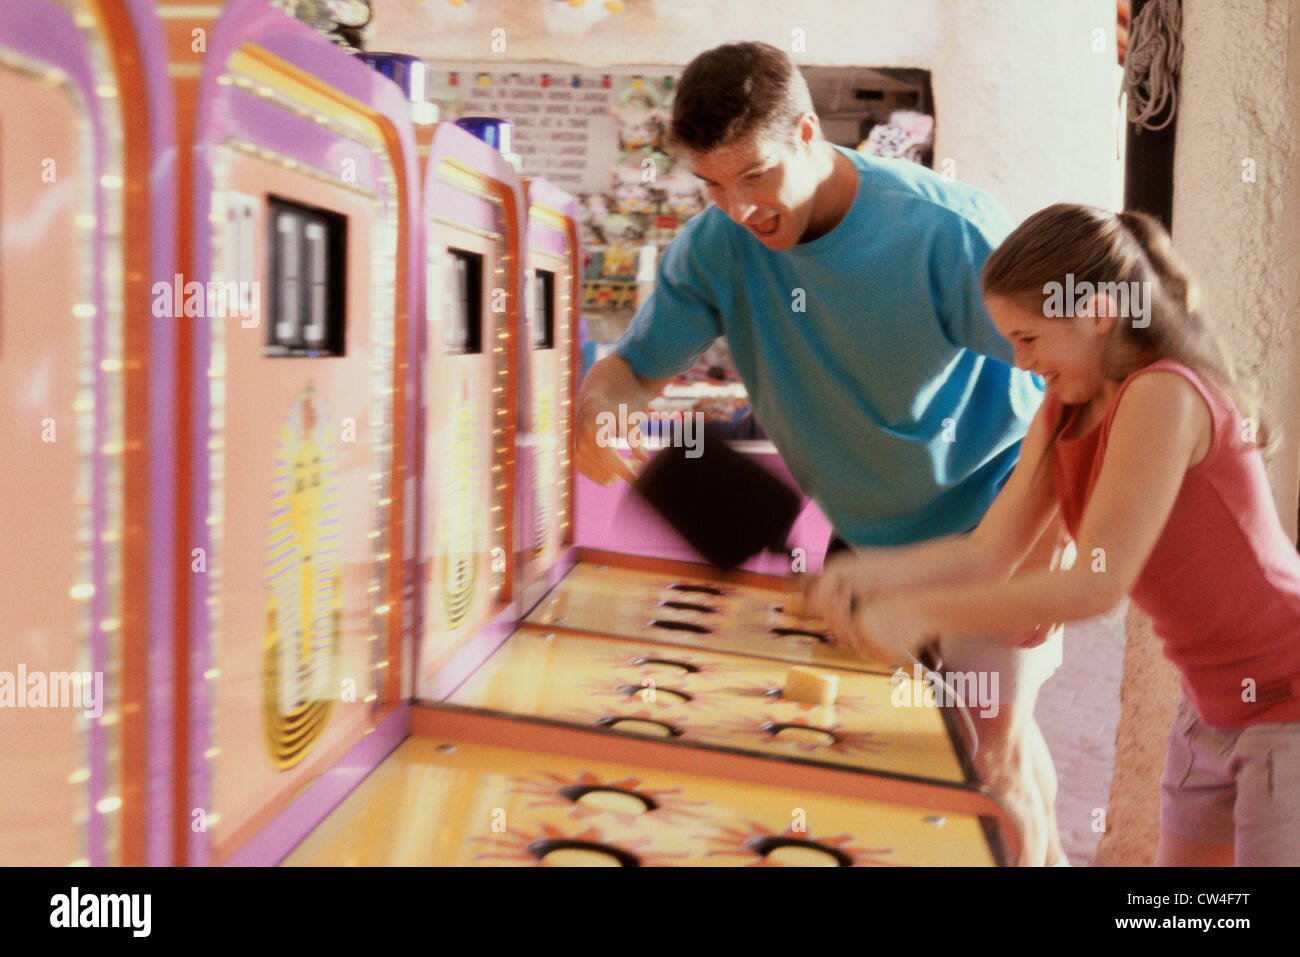 Daughter playing games with her father standing beside her in an amusement park Stock Photo